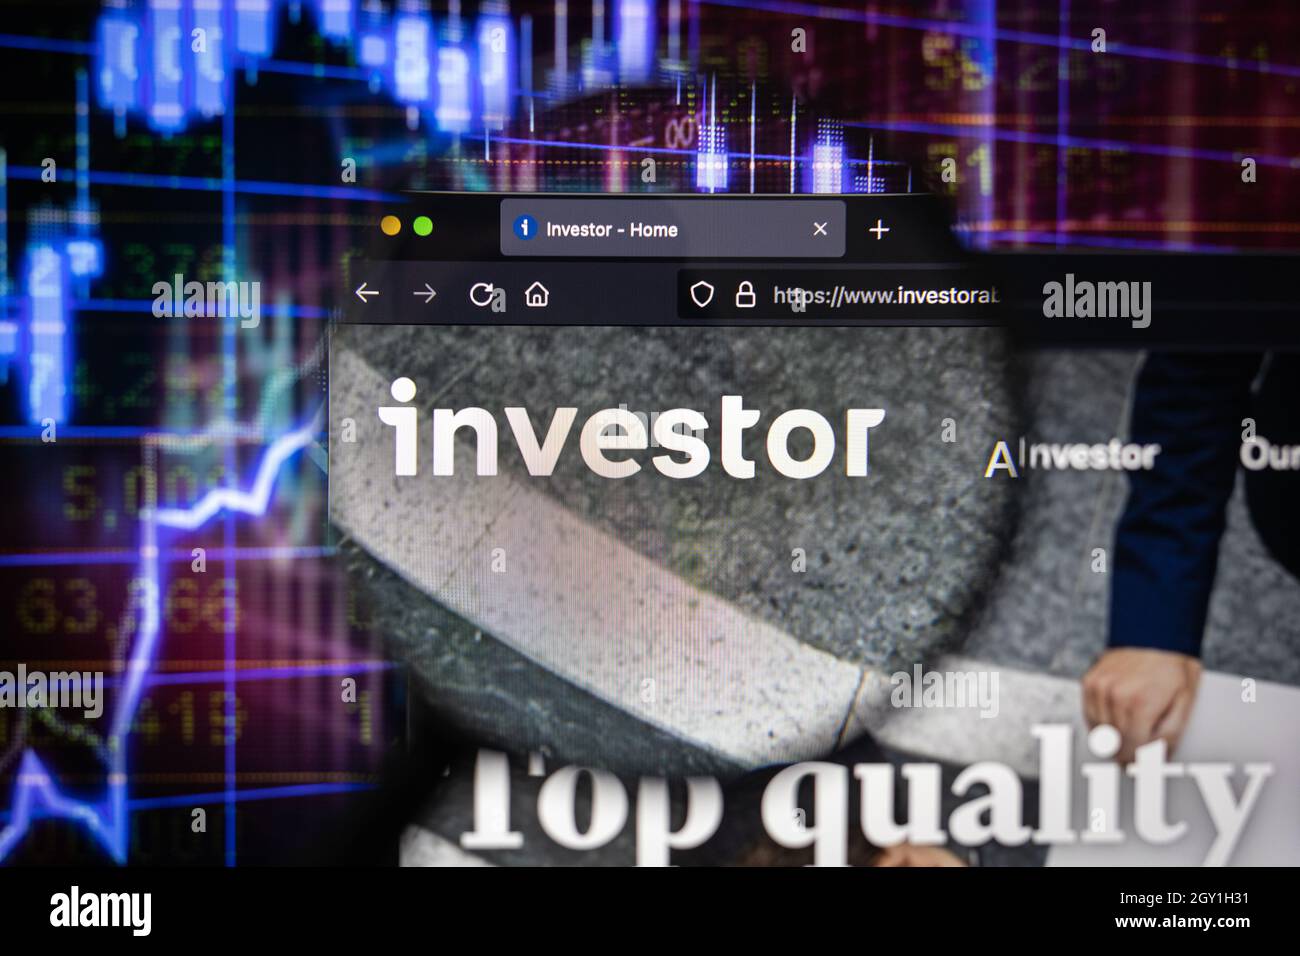 Investor company logo on a website with blurry stock market developments in the background, seen on a computer screen through a magnifying glass Stock Photo